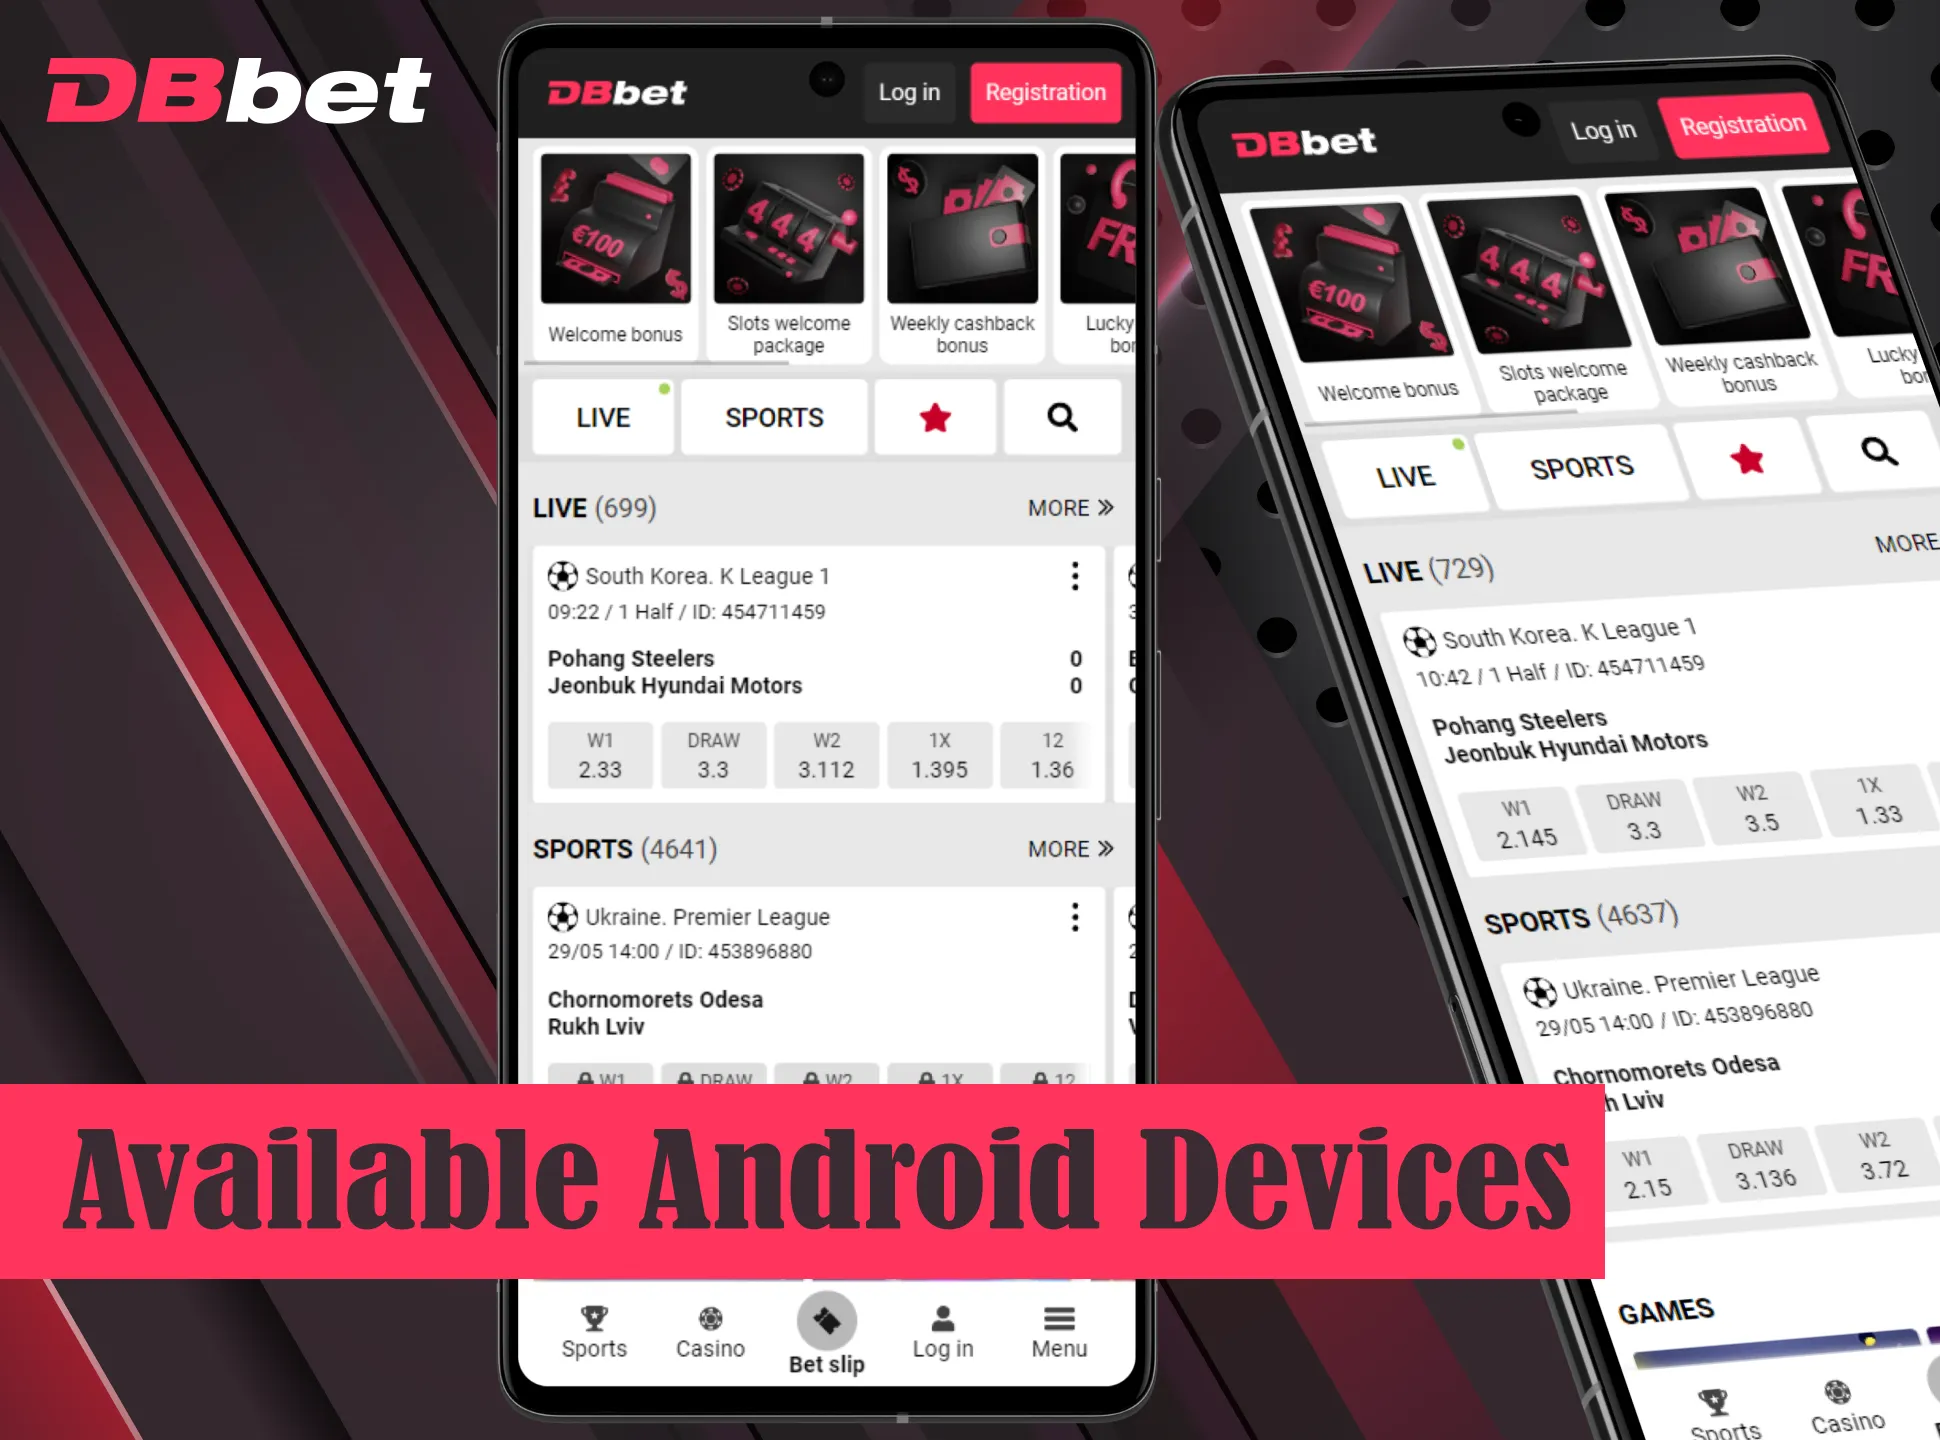 You can install DBbet app on almost any Android device.